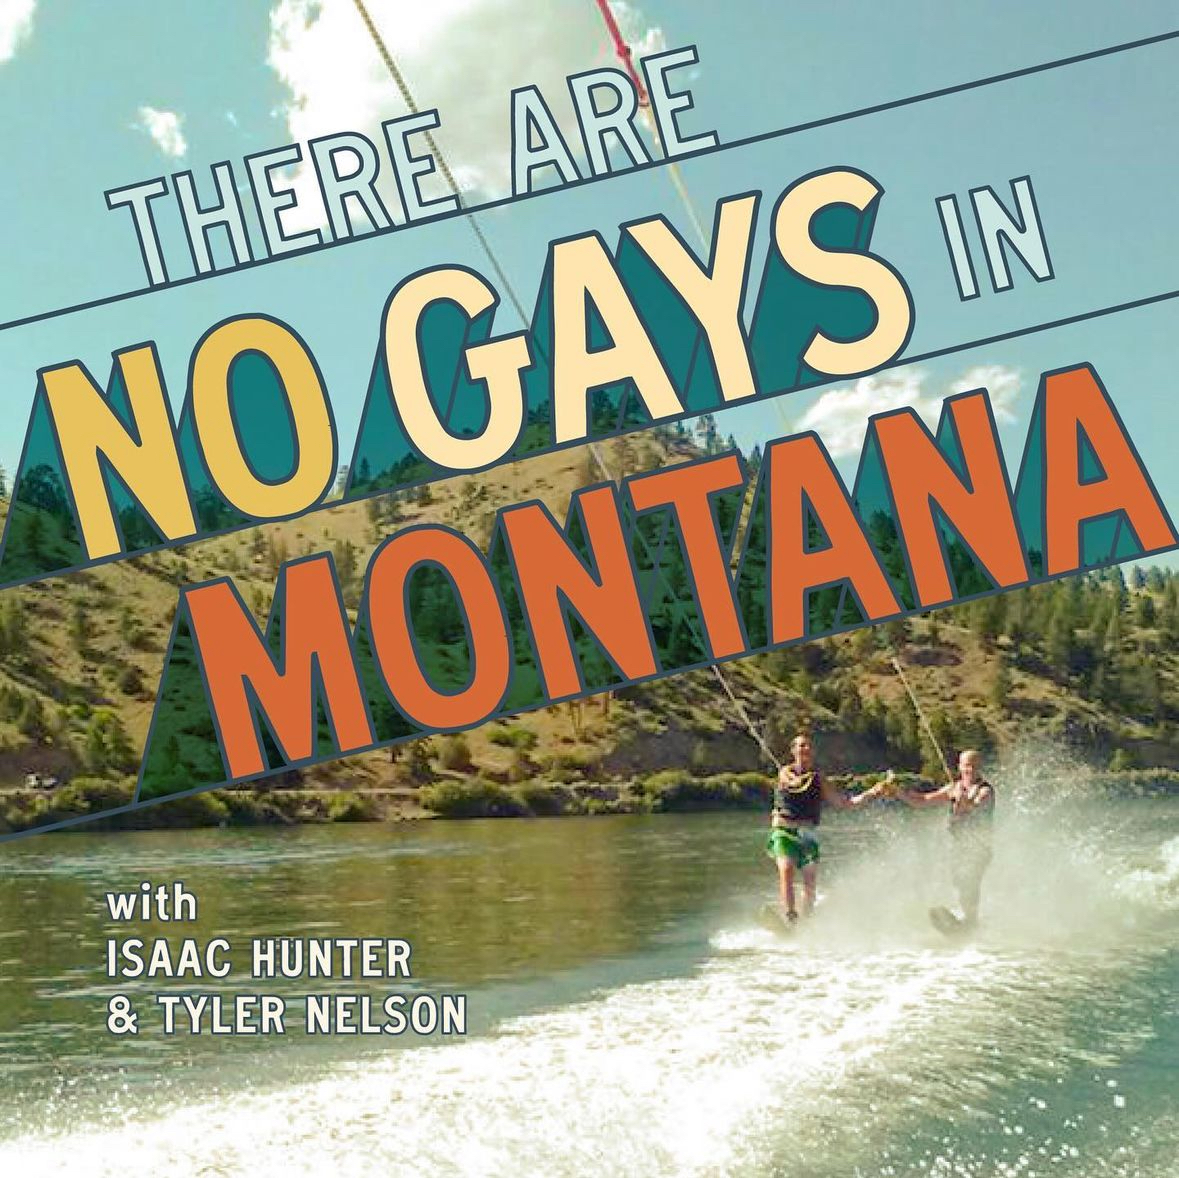 “There Are No Gays In Montana” Podcast Review